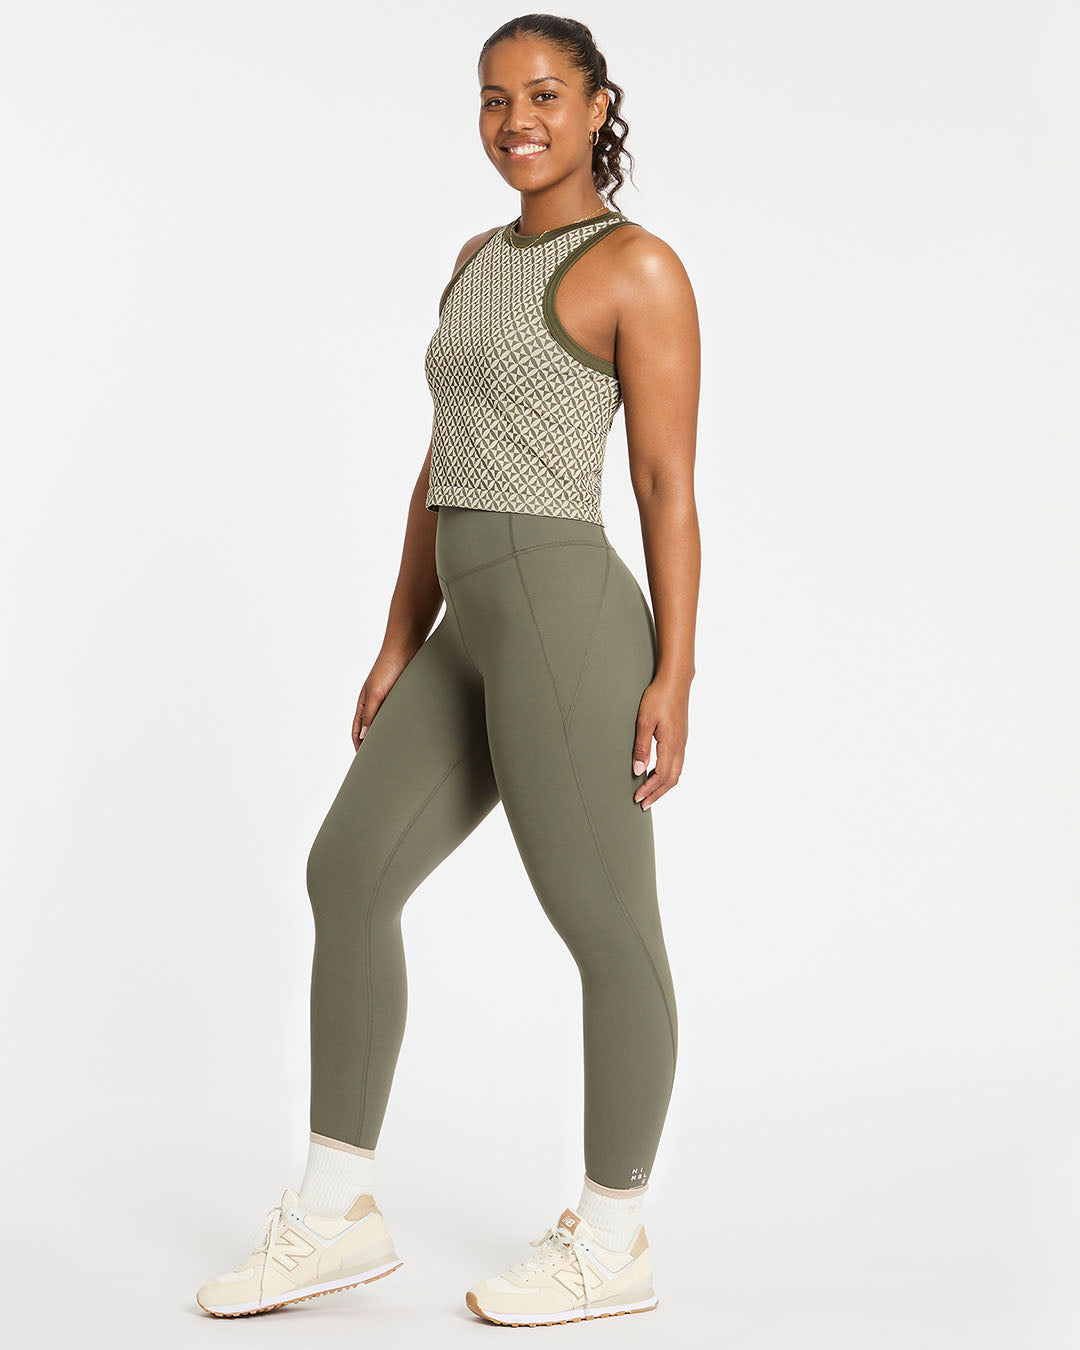 Mindful Knit Top - Dusty Olive Geo Tanks &amp; Tees by Nimble - Prae Store